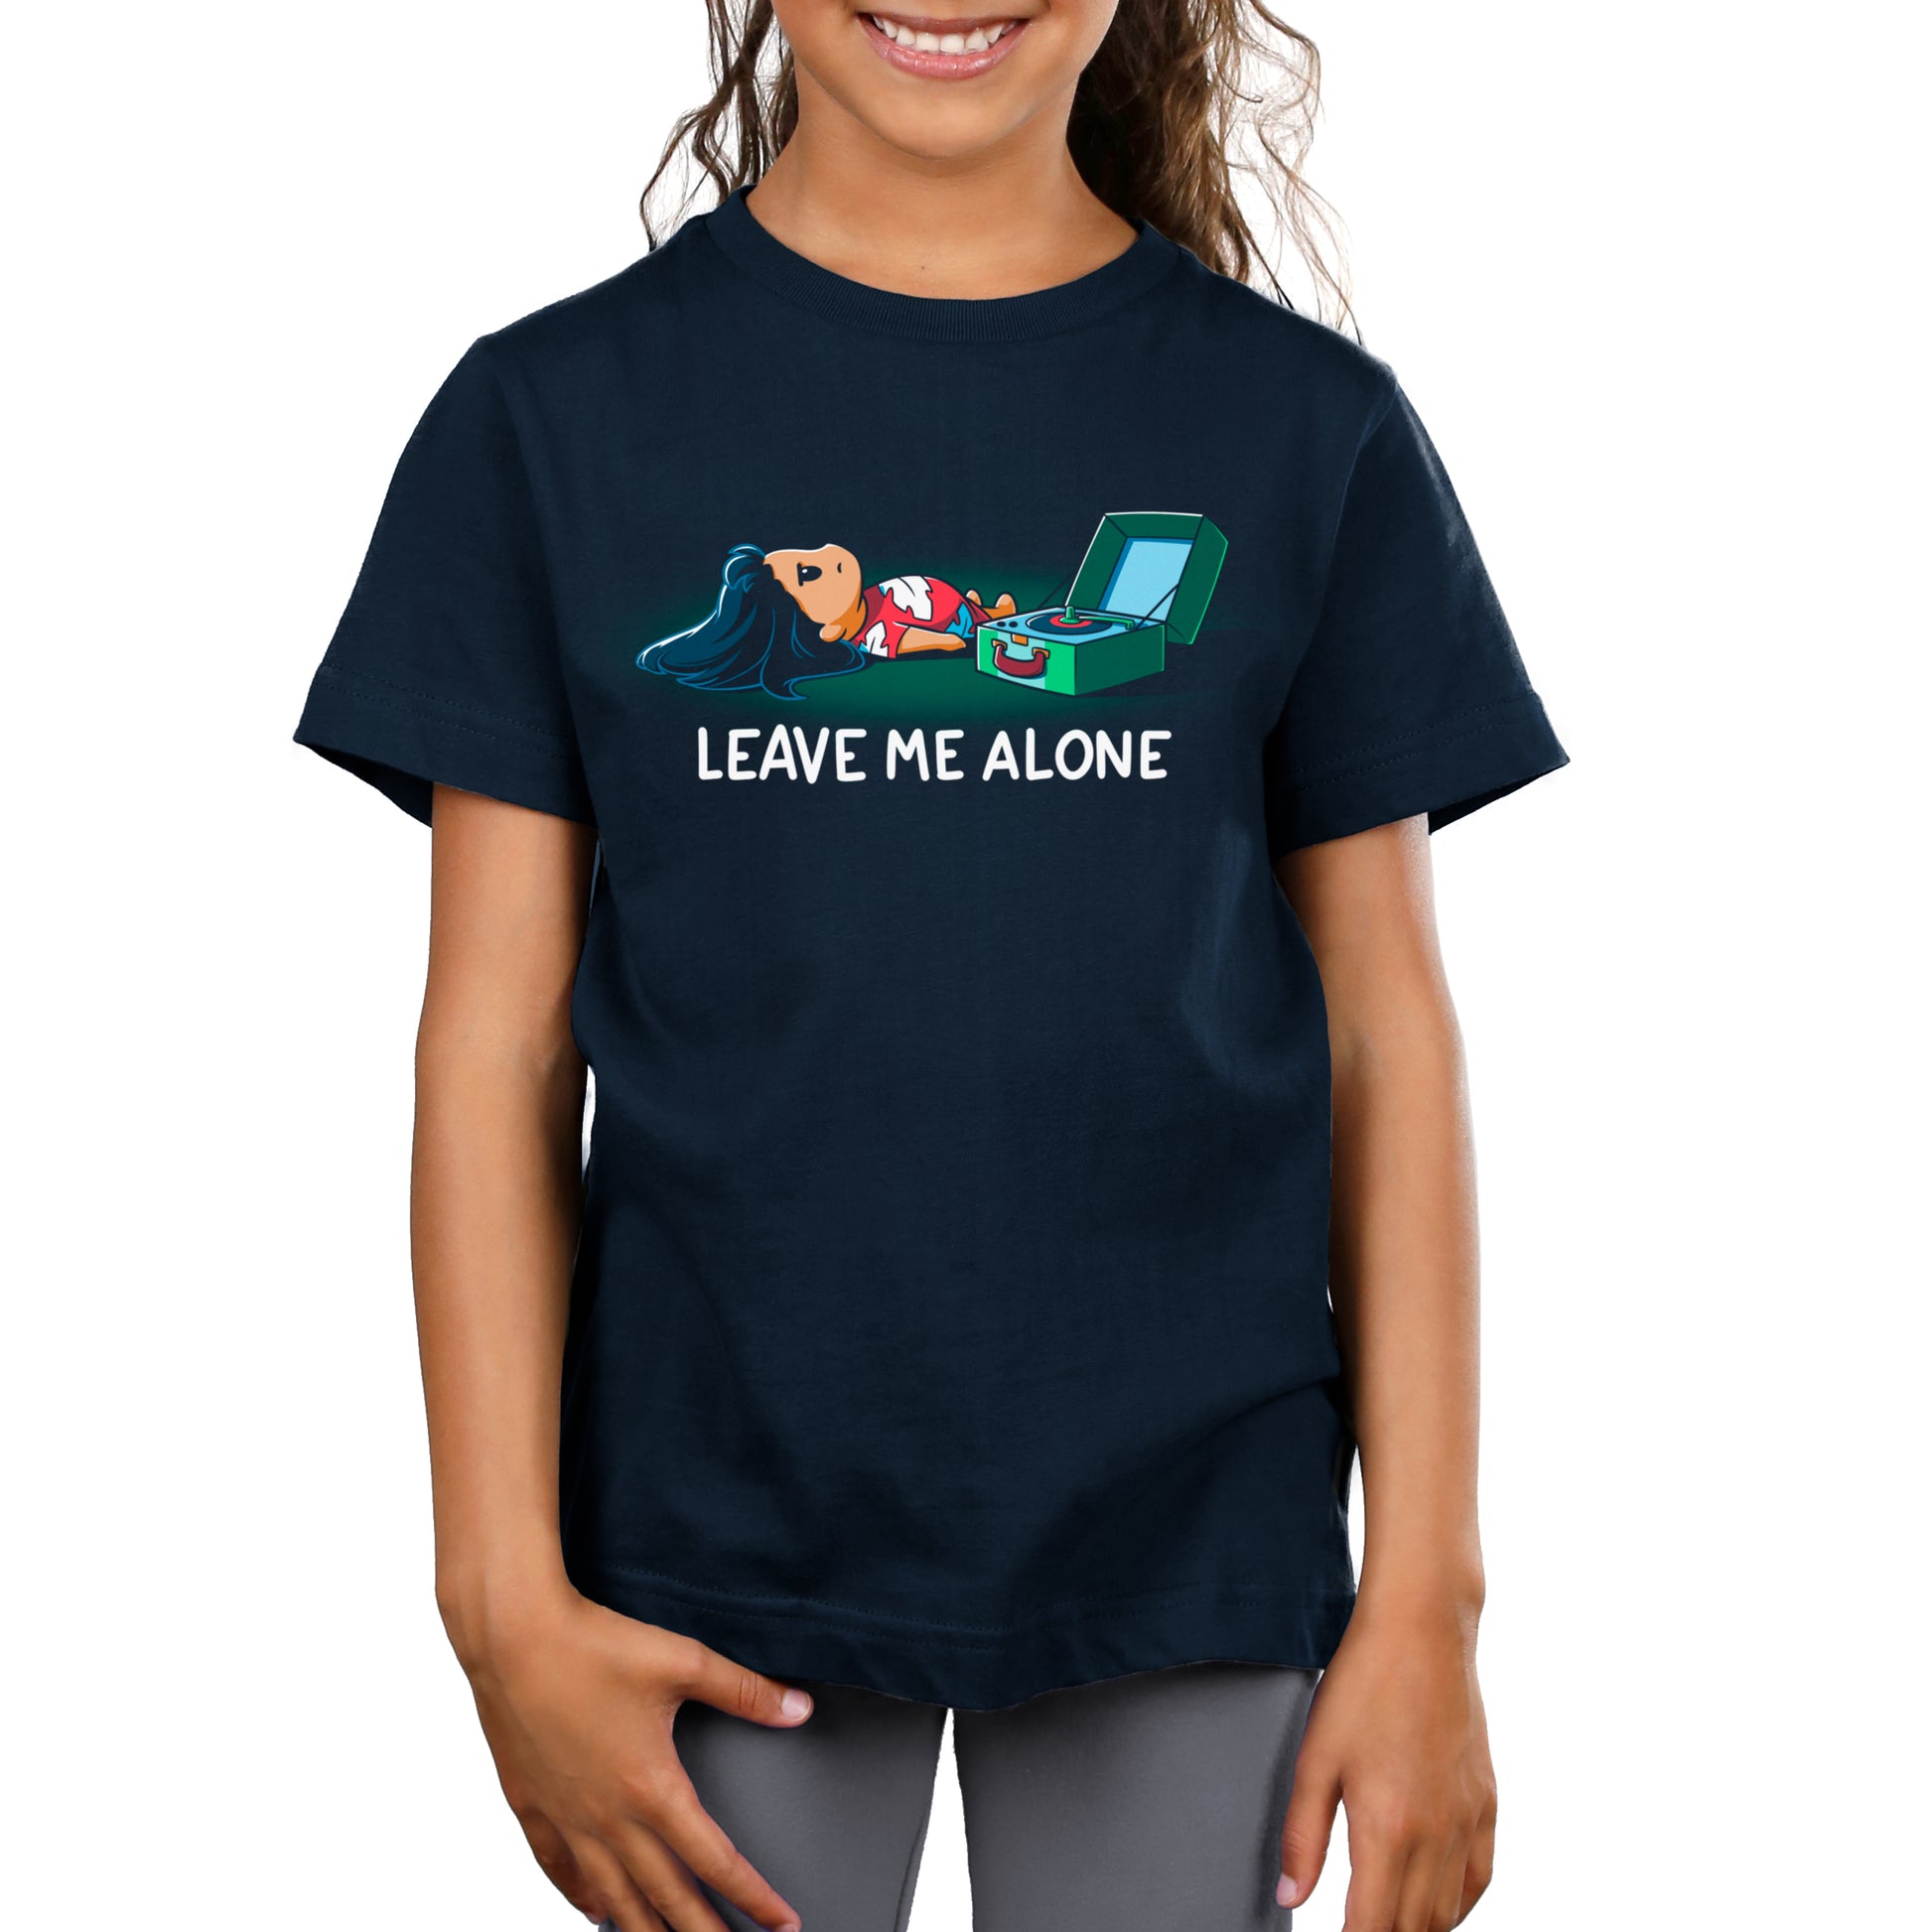 A girl wearing a officially licensed Disney "Leave Me Alone" t-shirt.